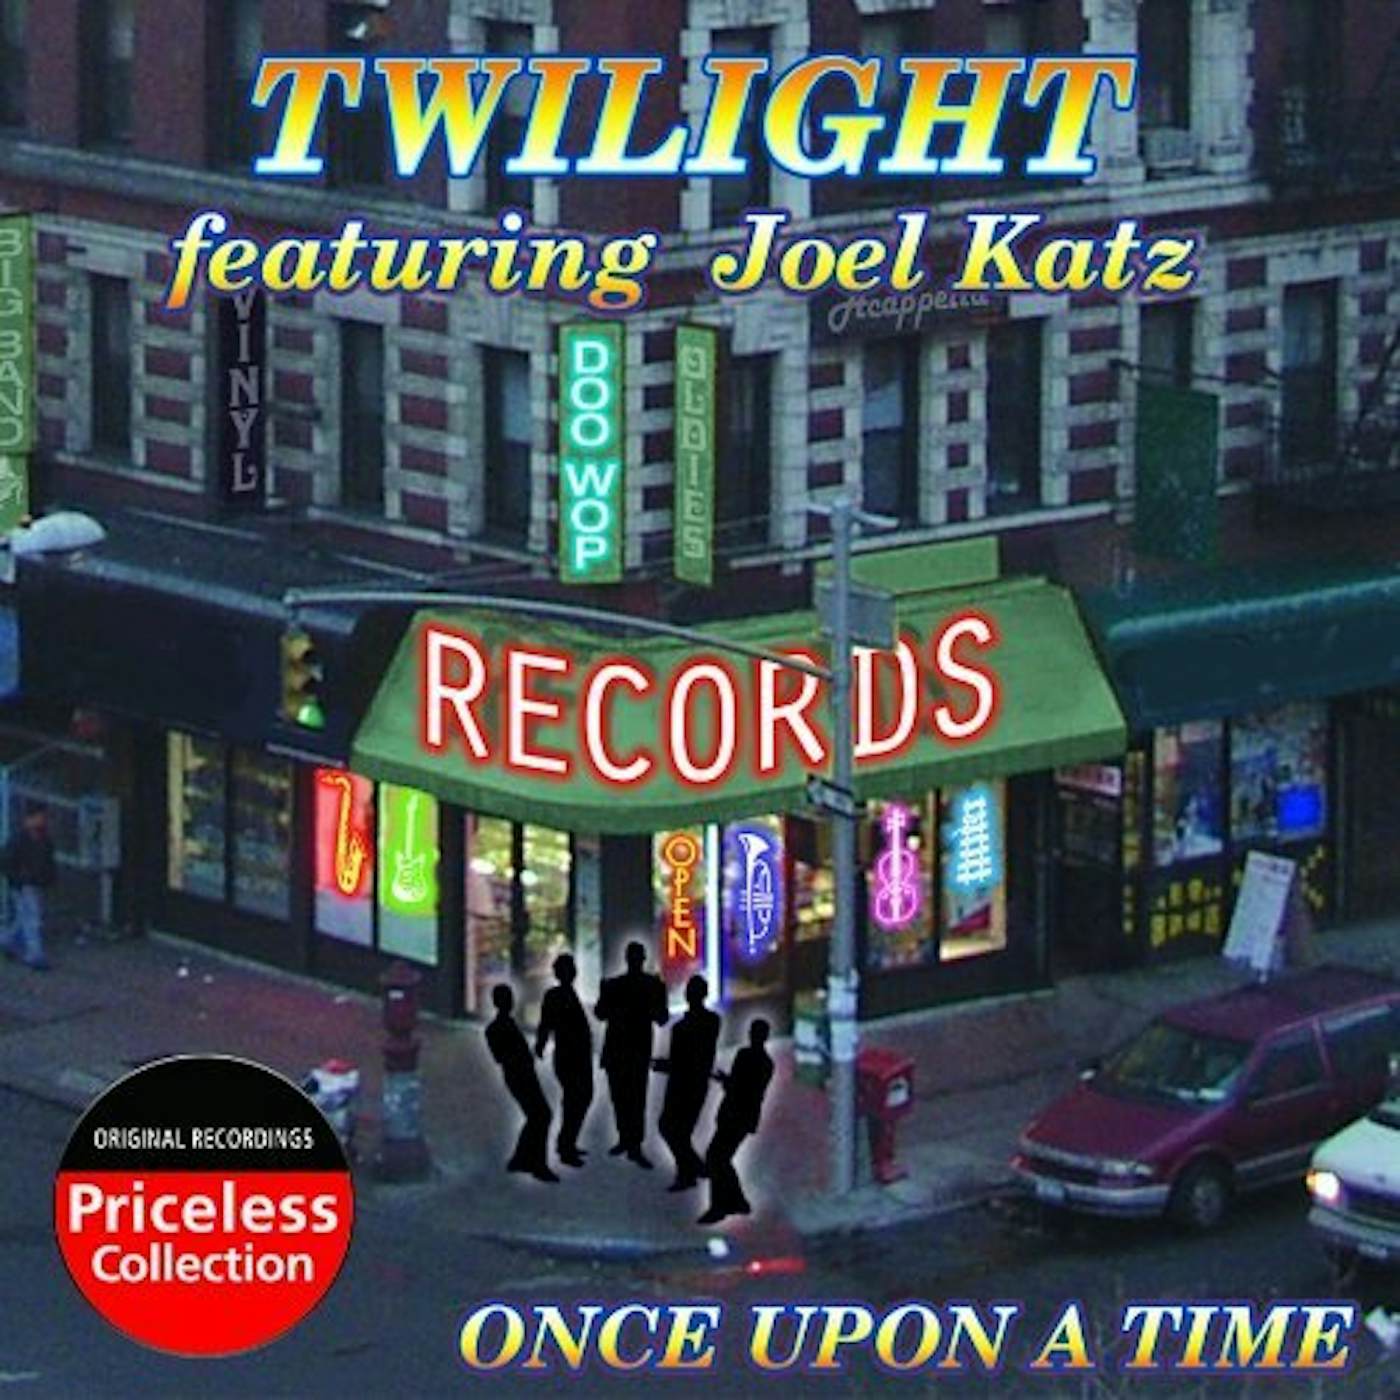 Twilight ONCE UPON A TIME CD